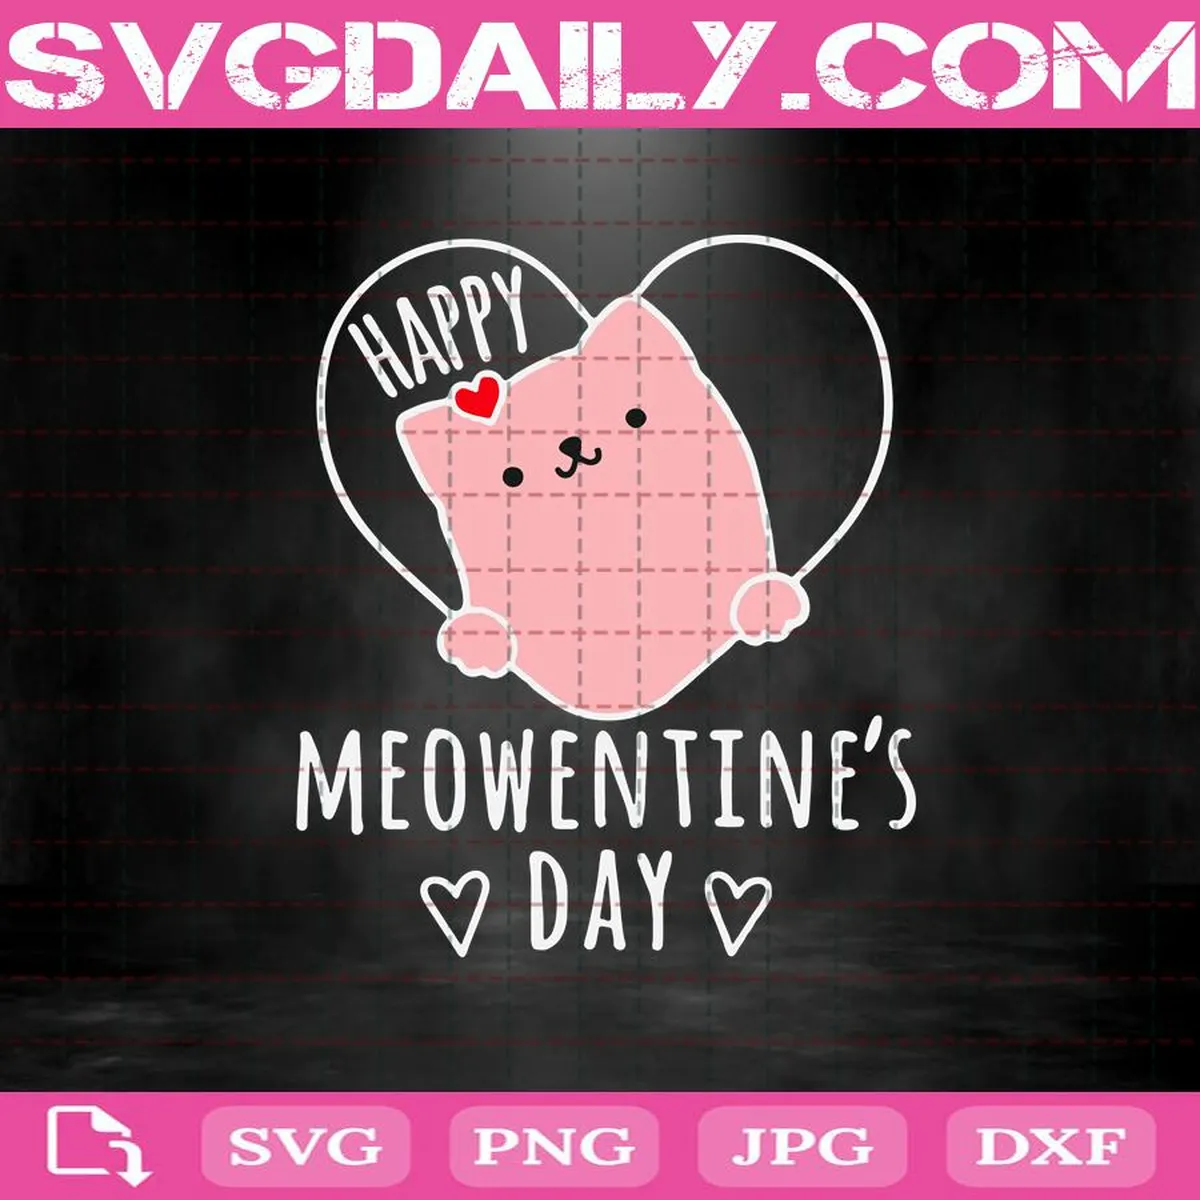 Happy Meowentine’s Day Svg, Meow Svg, Cute Cate Svg, Happy Valentine’s Day Svg, Love Svg, Cute Valentine Svg